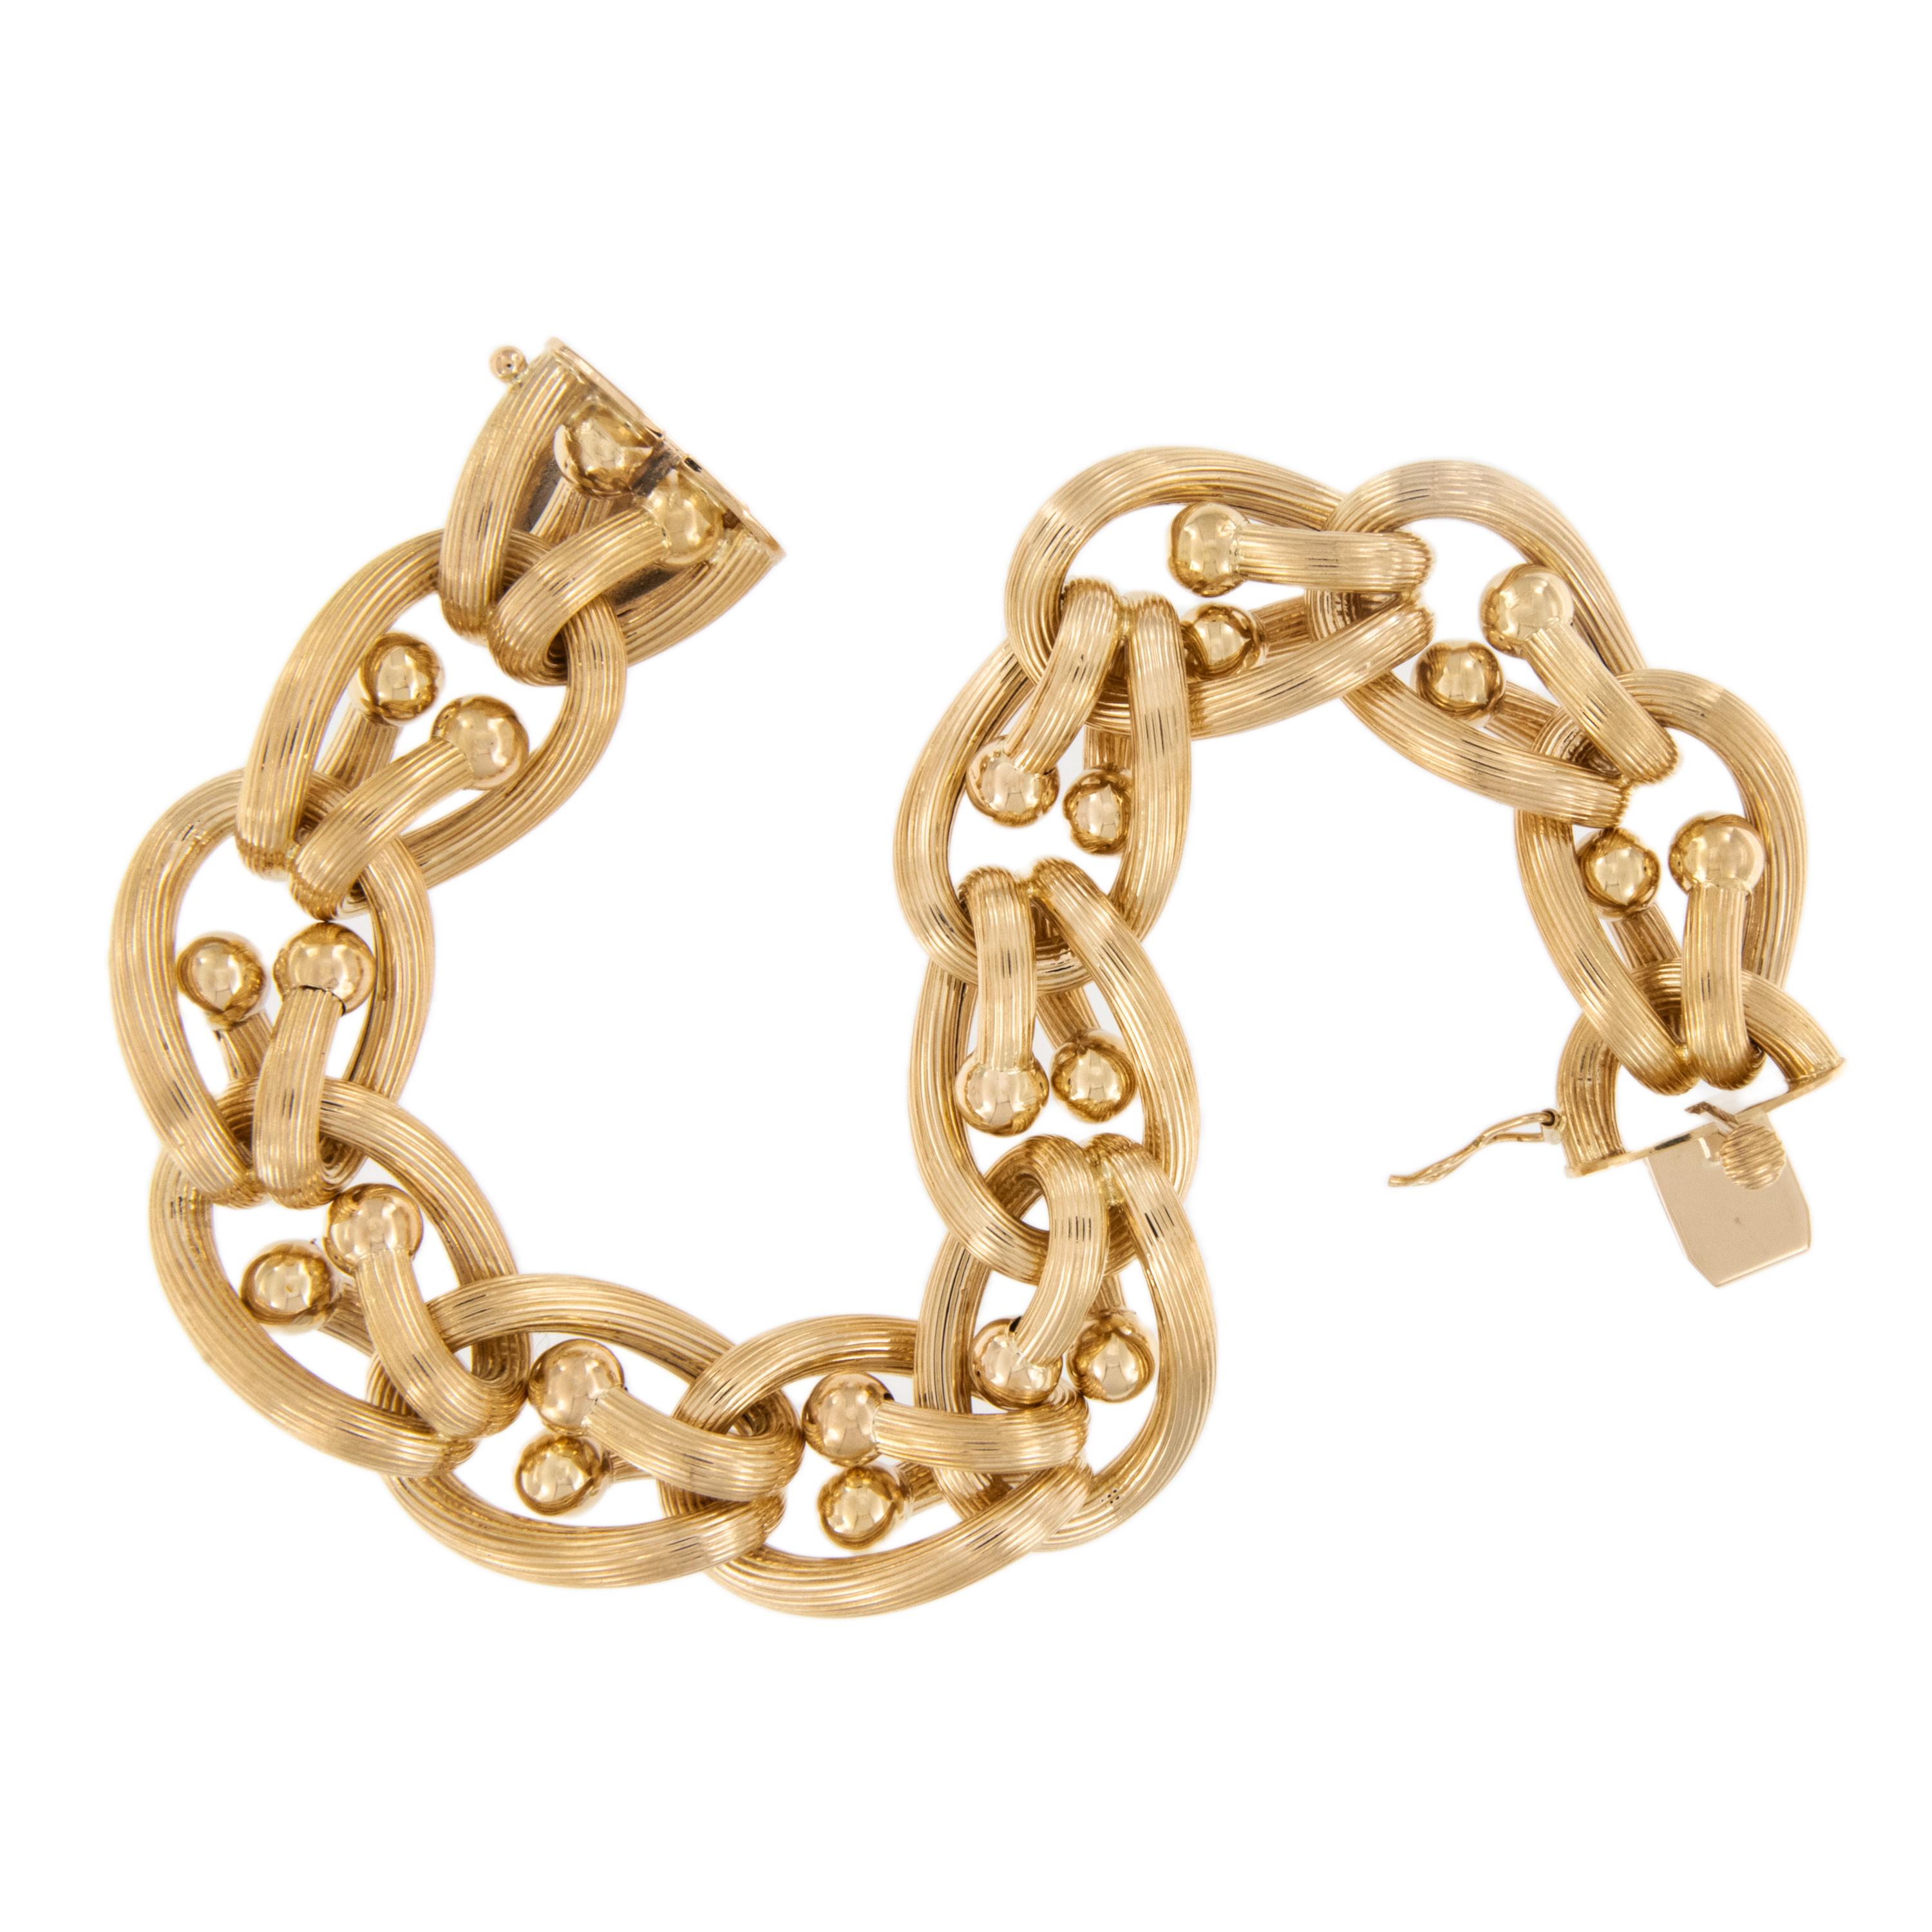 This eye catching bracelet is comprised of 18 karat yellow gold with ribbed, oval loop through with ball ends for a bold, fashionable look! You will get a boost of confidence from the moment you put it on your wrist! Bracelet is 8.5